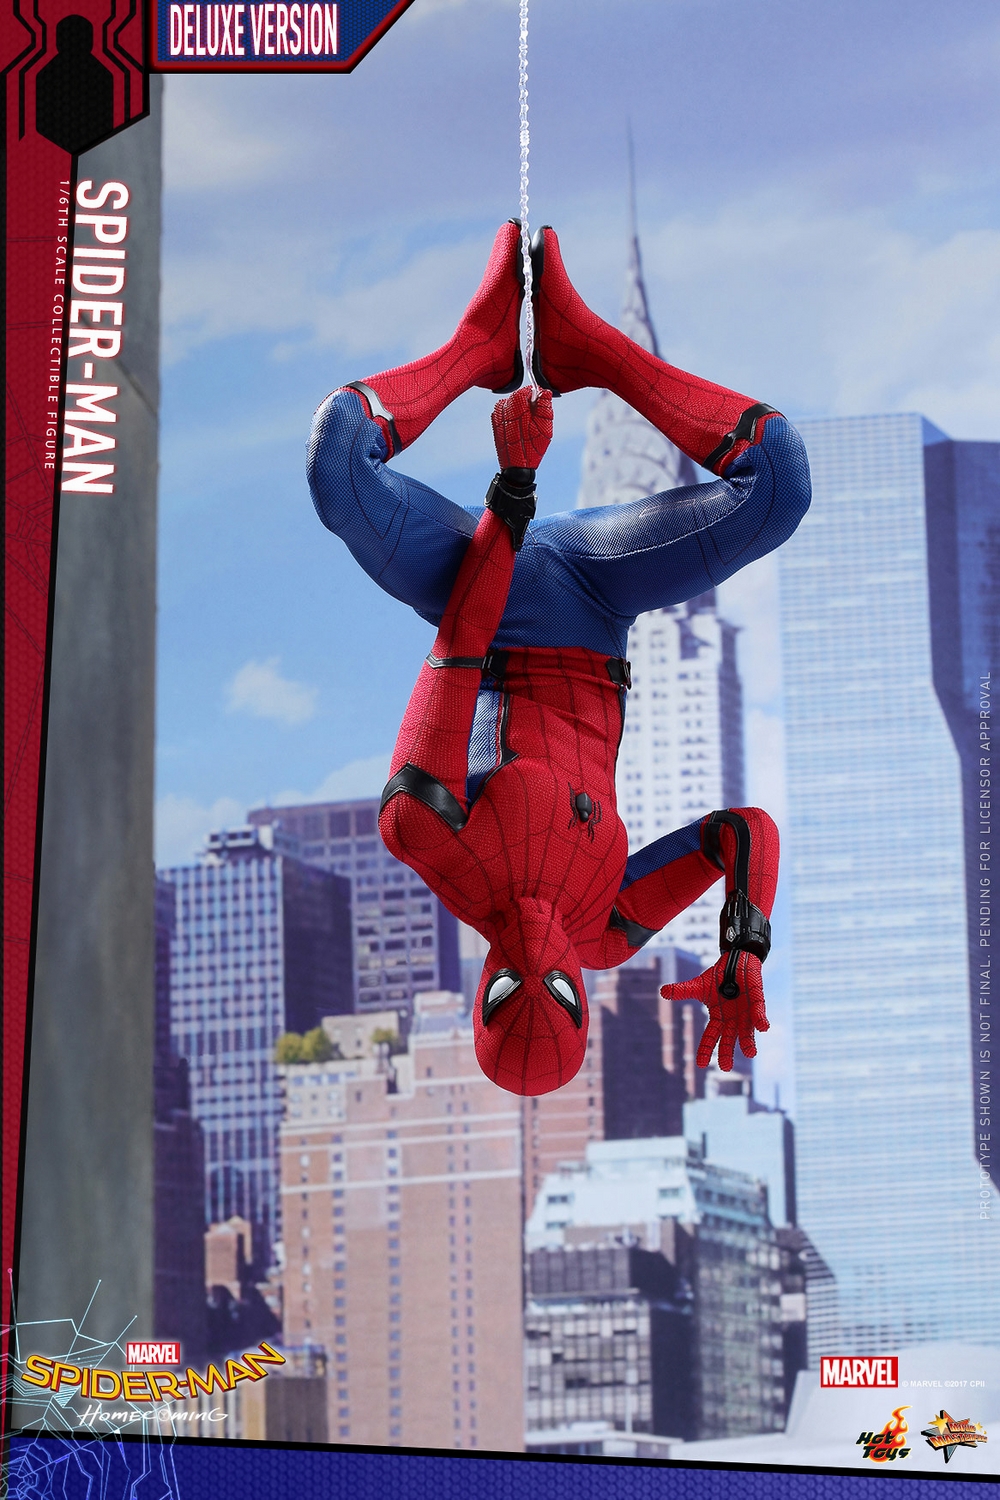 Hot-Toys-MMS426-Spider-Man-Homecoming-Deluxe-007.jpg